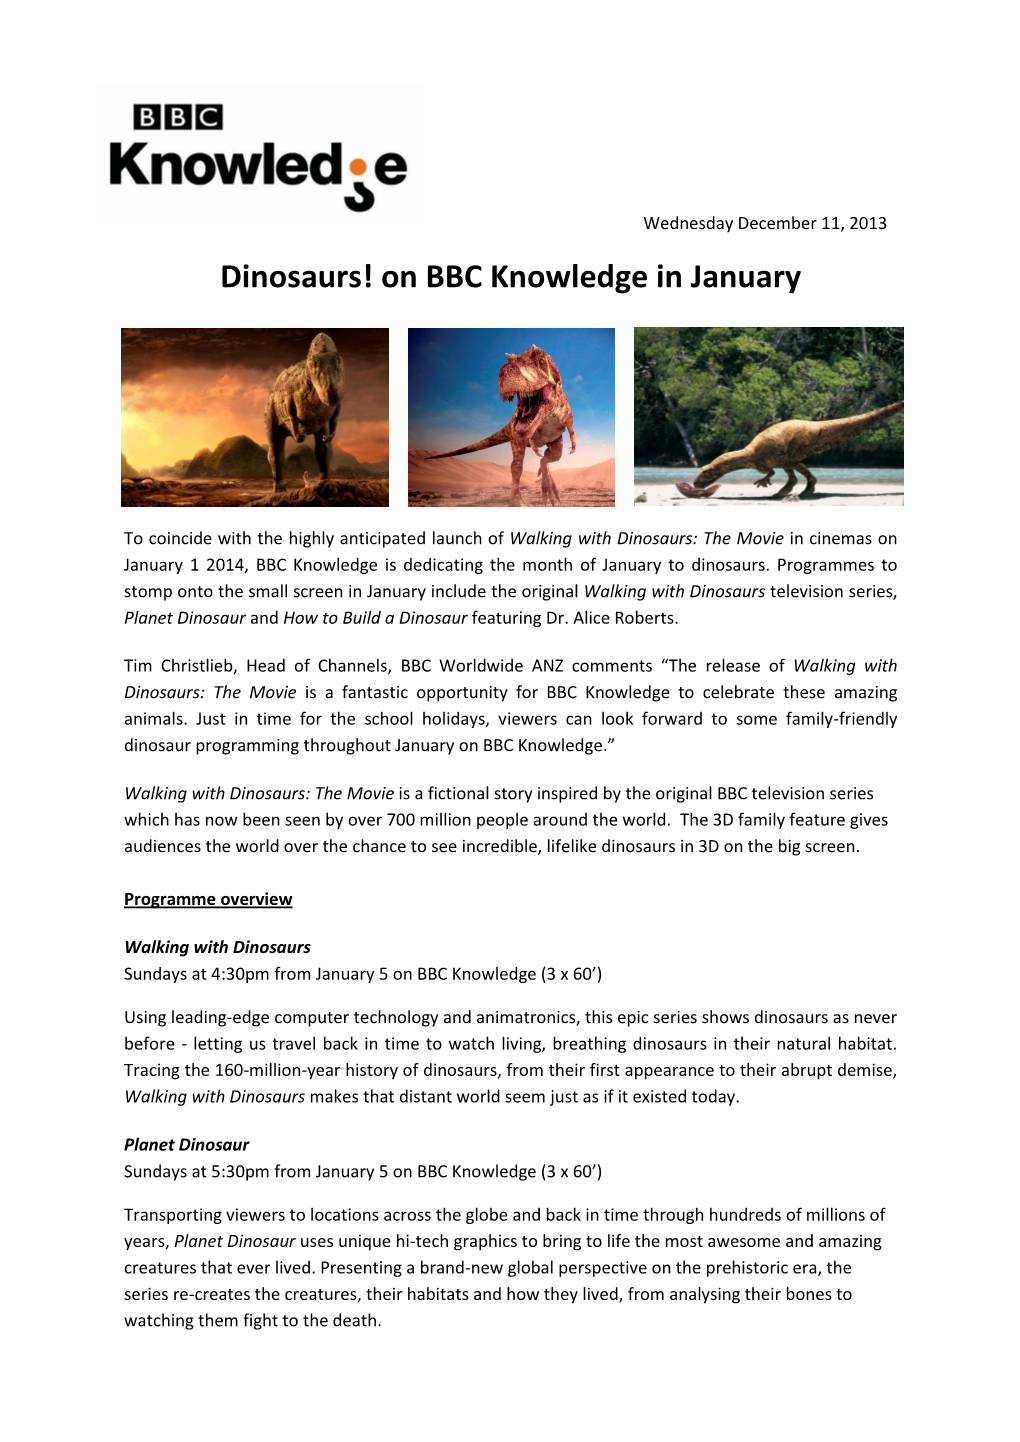 Dinosaurs! on BBC Knowledge in January